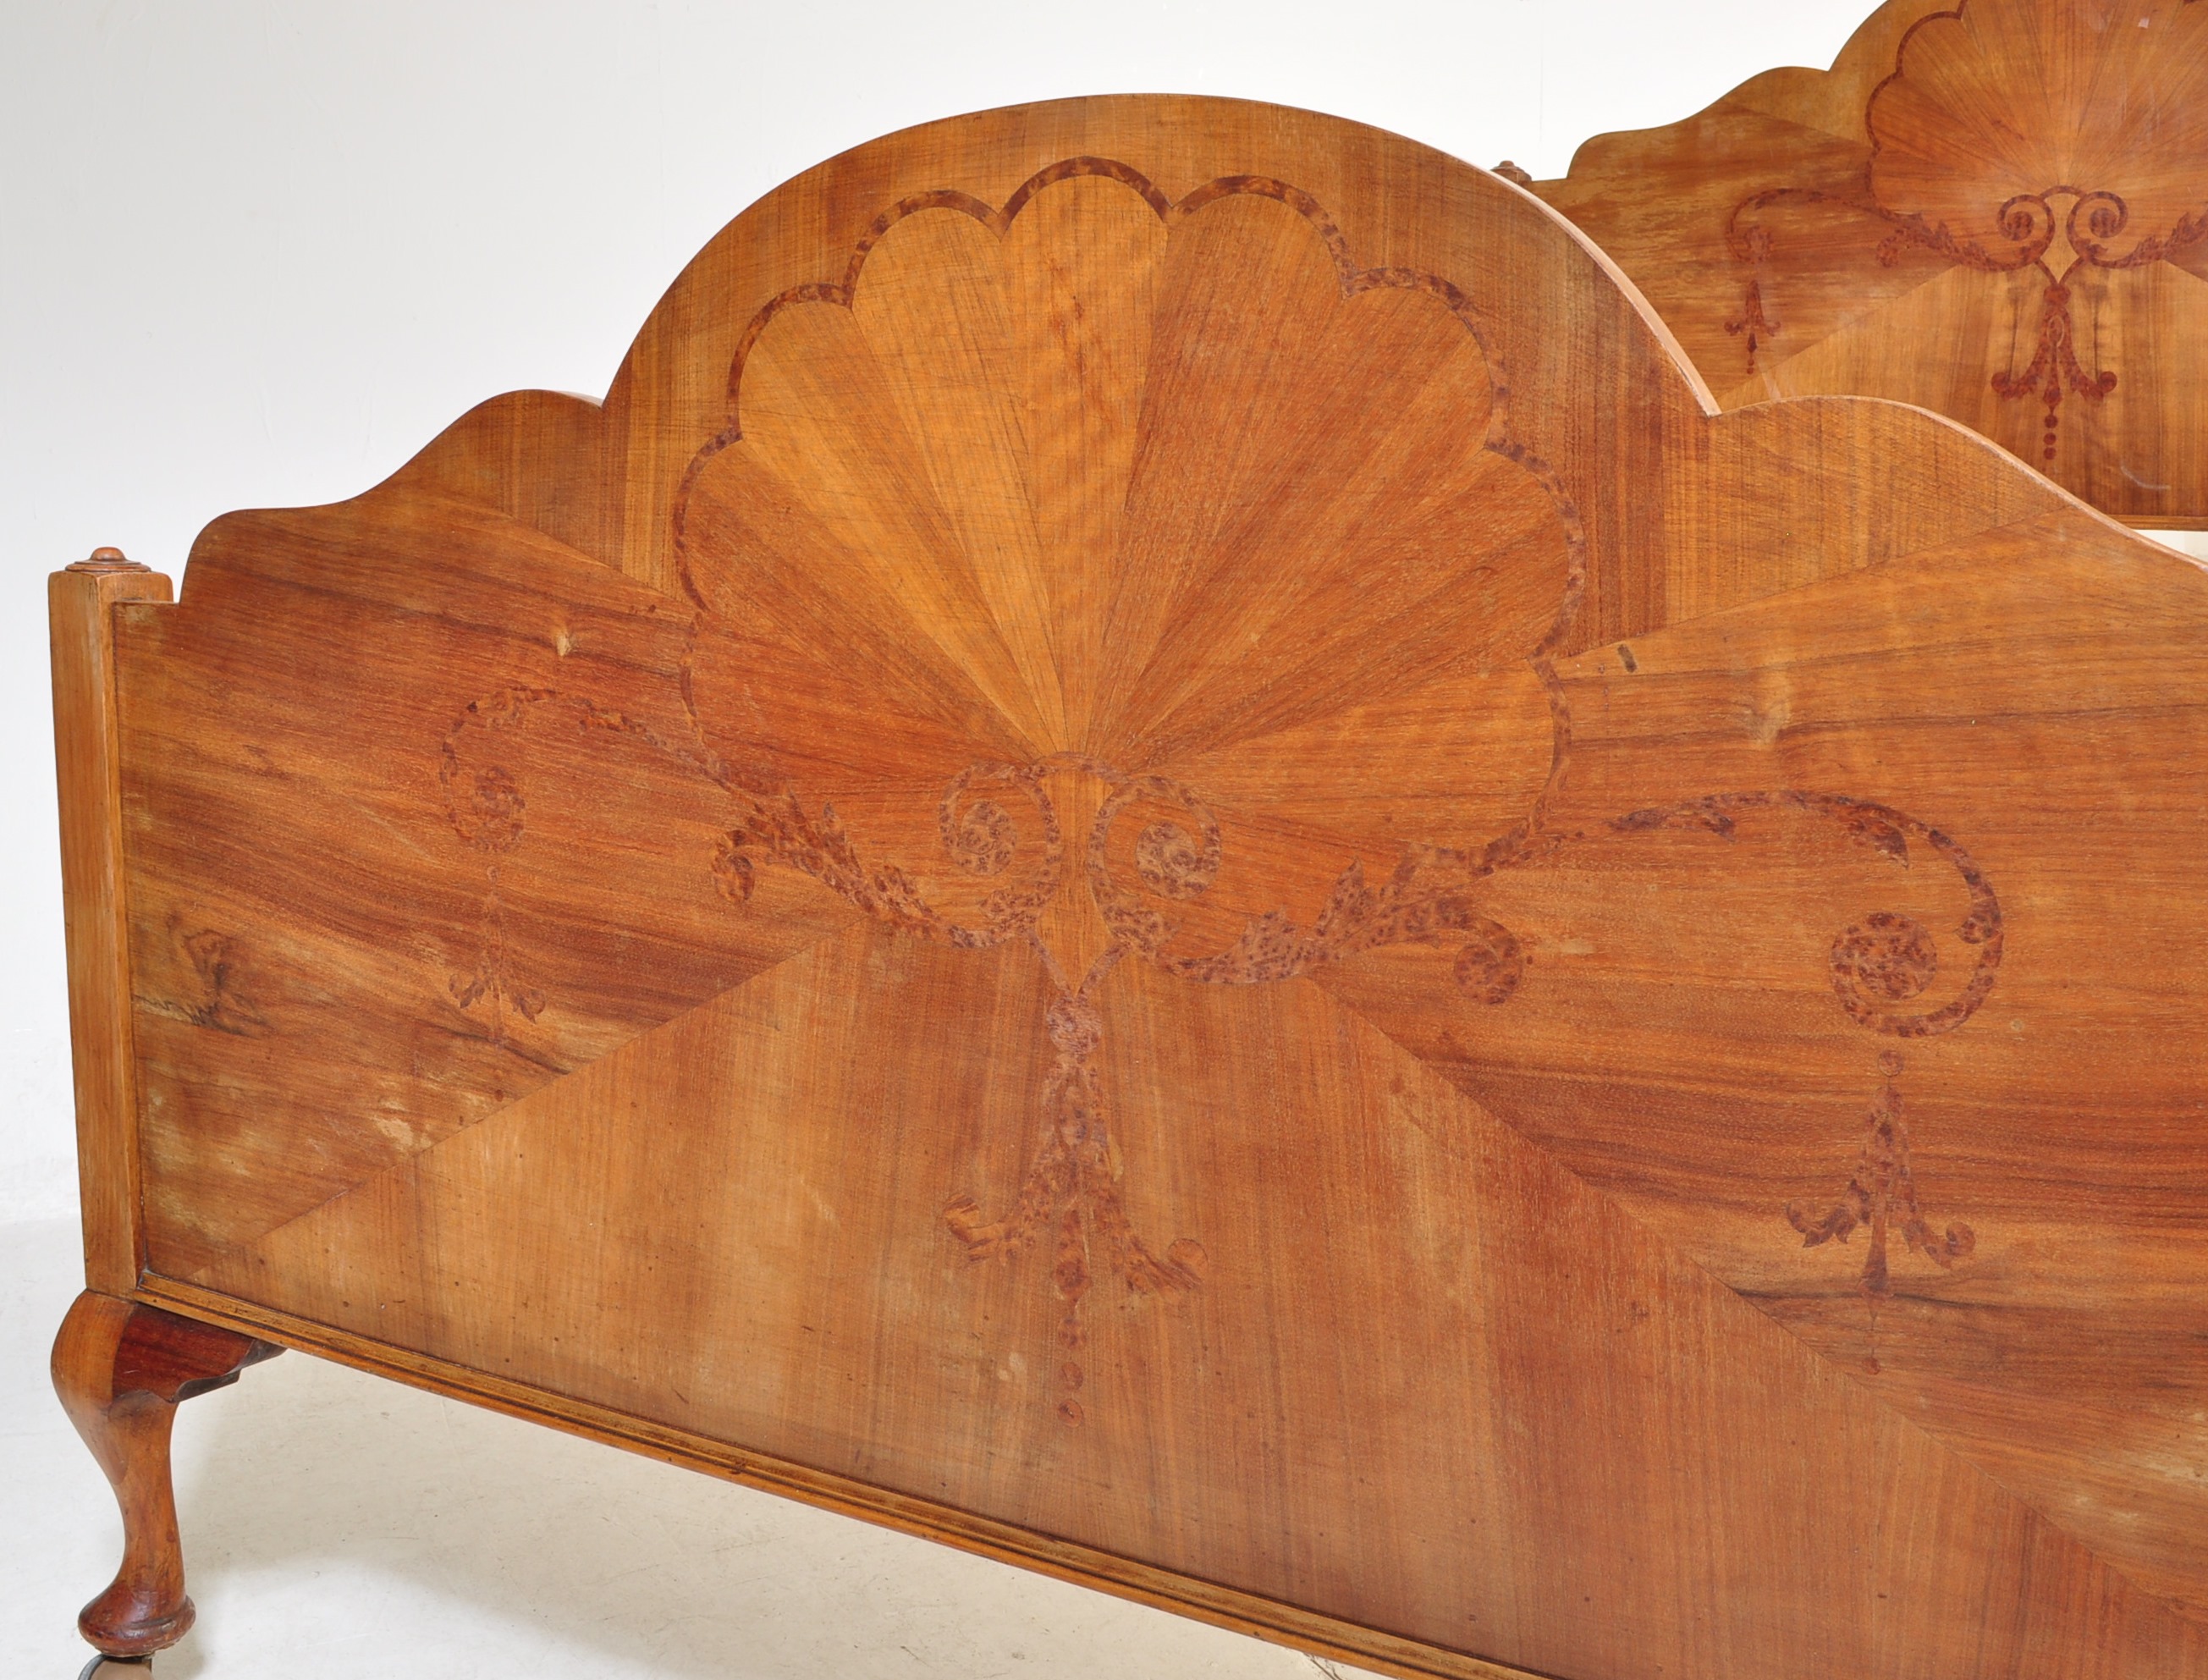 EARLY 20TH CENTURY ART DECO BURR WALNUT BED FRAME - Image 5 of 6